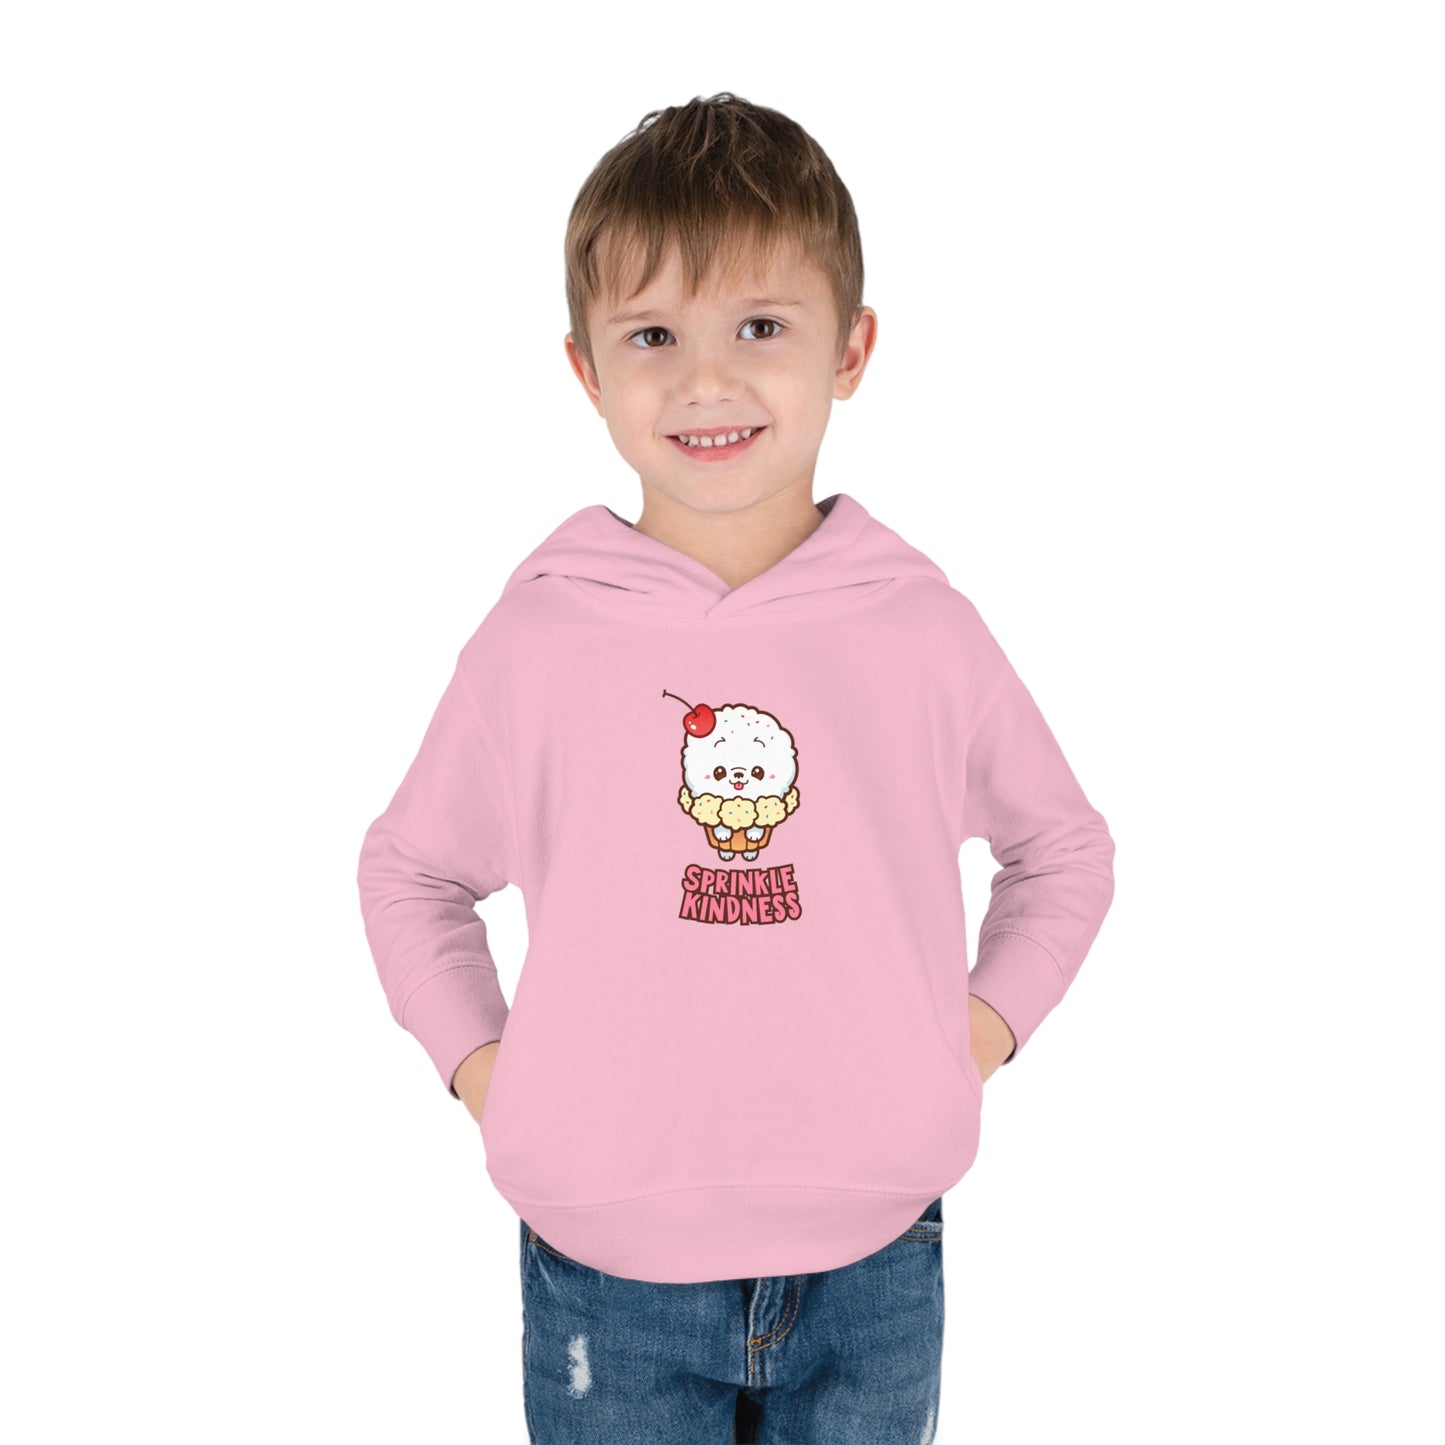 Sprinkle Kindness Toddler Pullover Fleece Hoodie, Pink Shirt Day Sweatshirt, Anti-Bullying Apparel For Kids